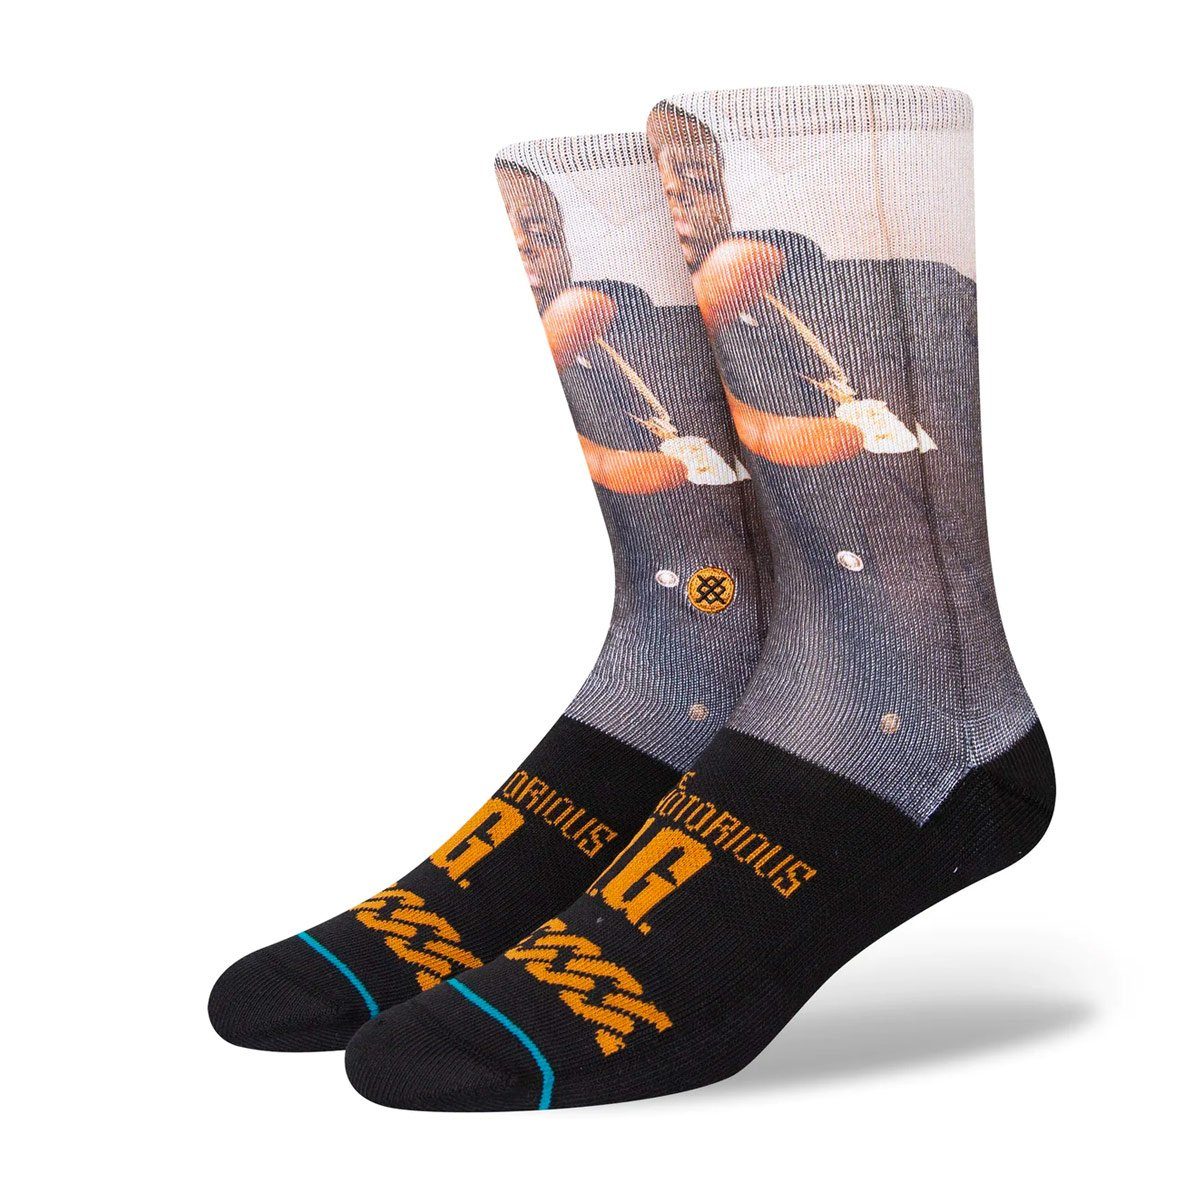 (1 Notorious B.I.G. x Freizeitsocken Paar) black The Stance Stance The Of King NY -